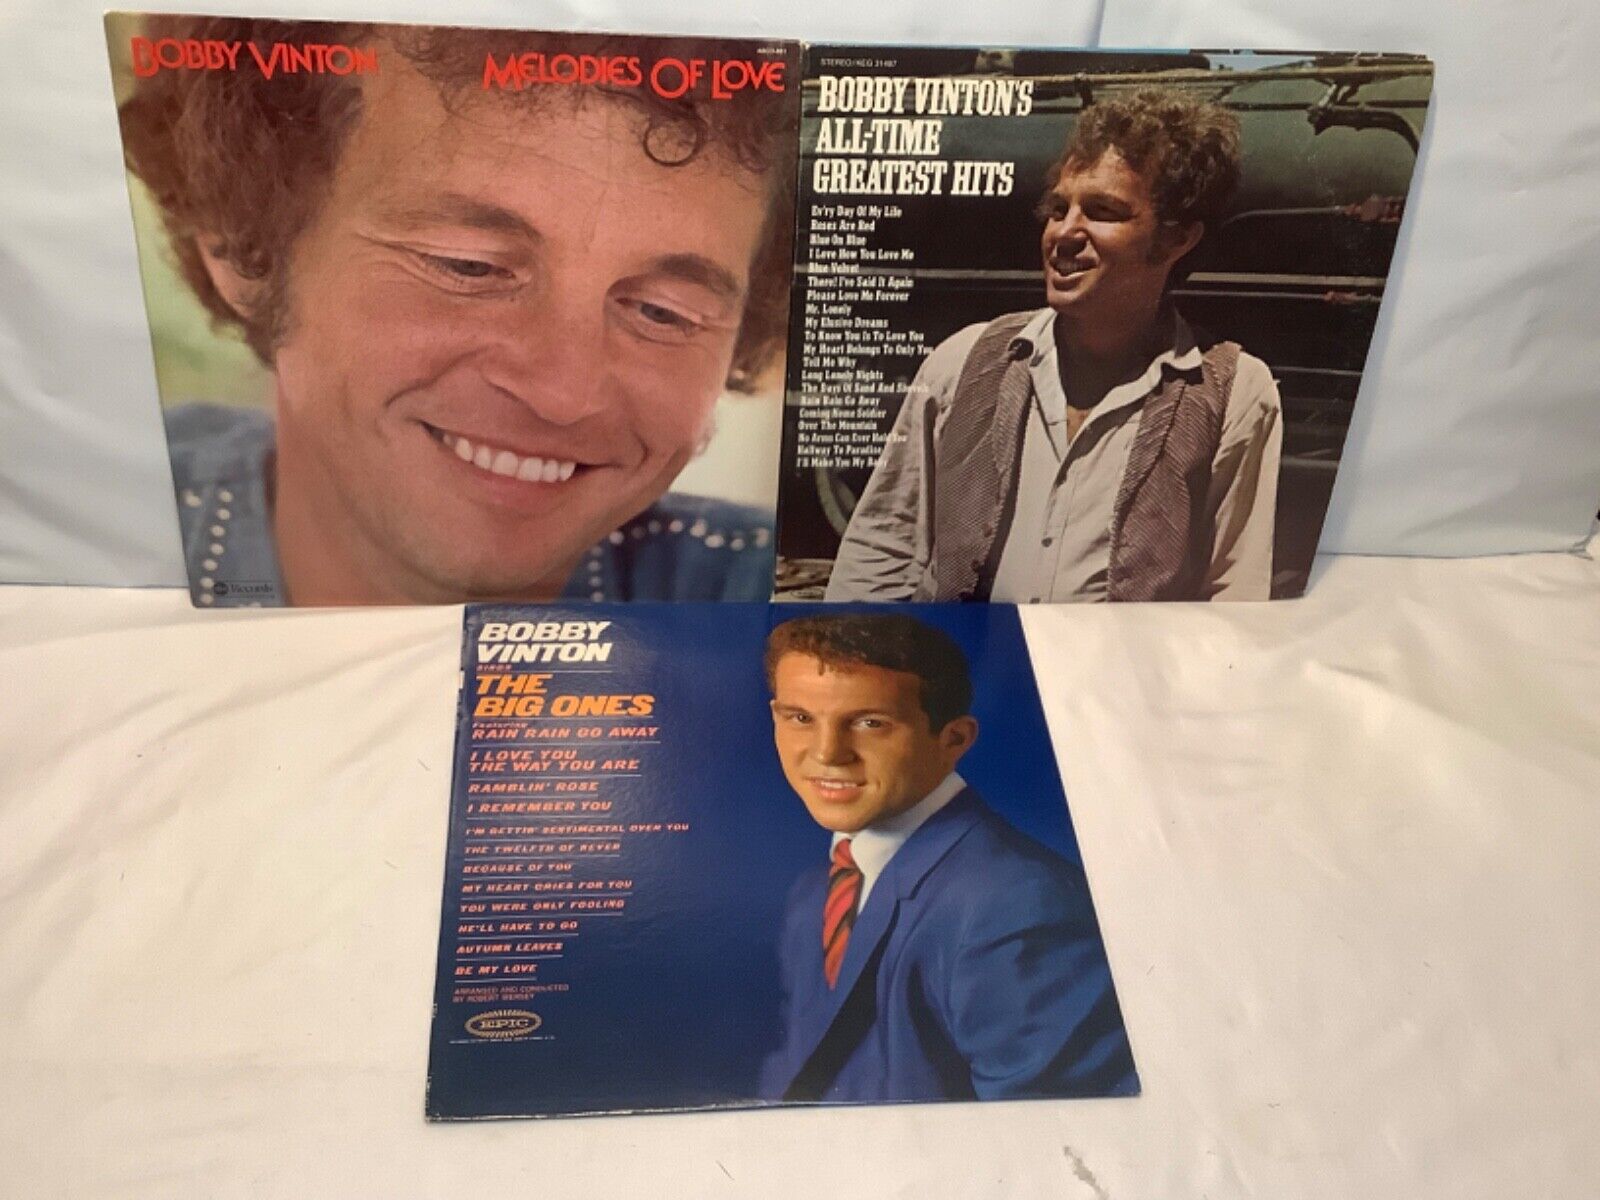 VINTAGE Lot of 3 Bobby Vinton-Sings The Big Ones/All-Time Greatest Hits/Melodies